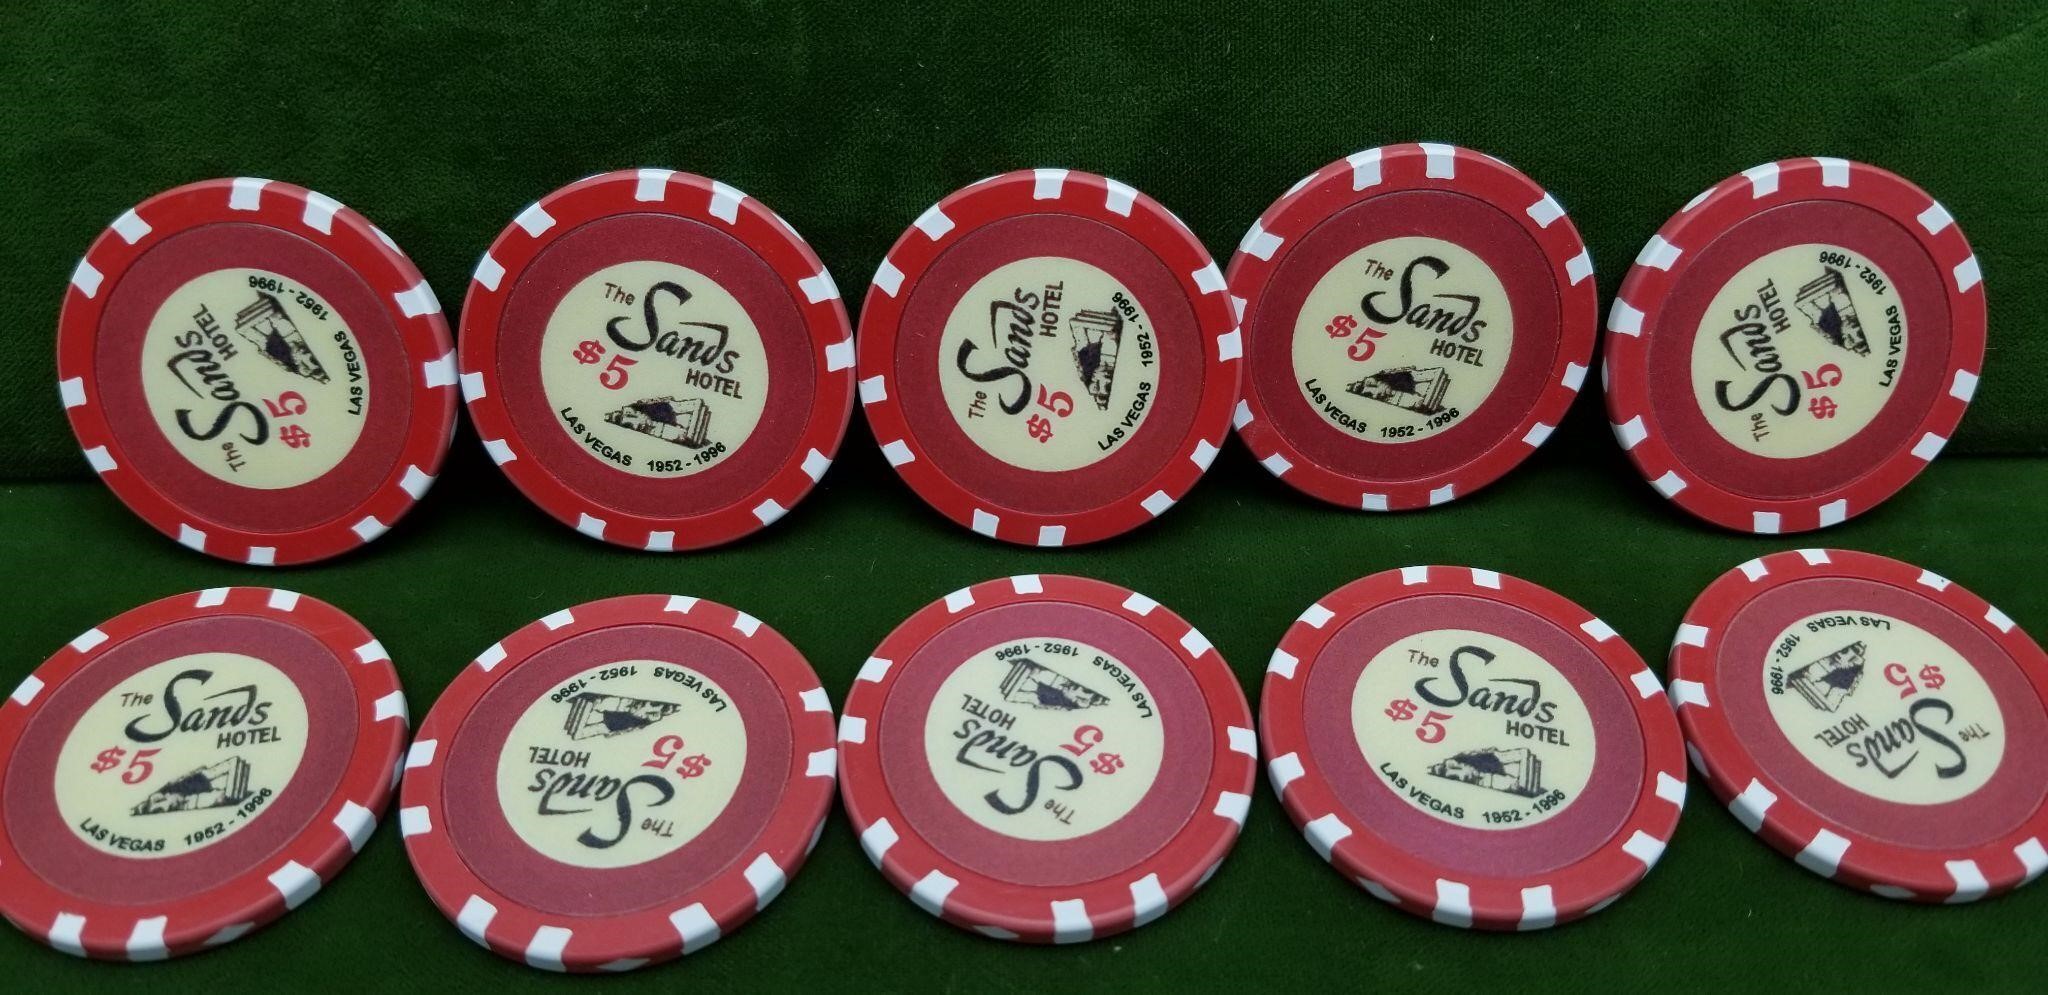 10-SANDS HOTEL 5.00 CASINO CHIPS